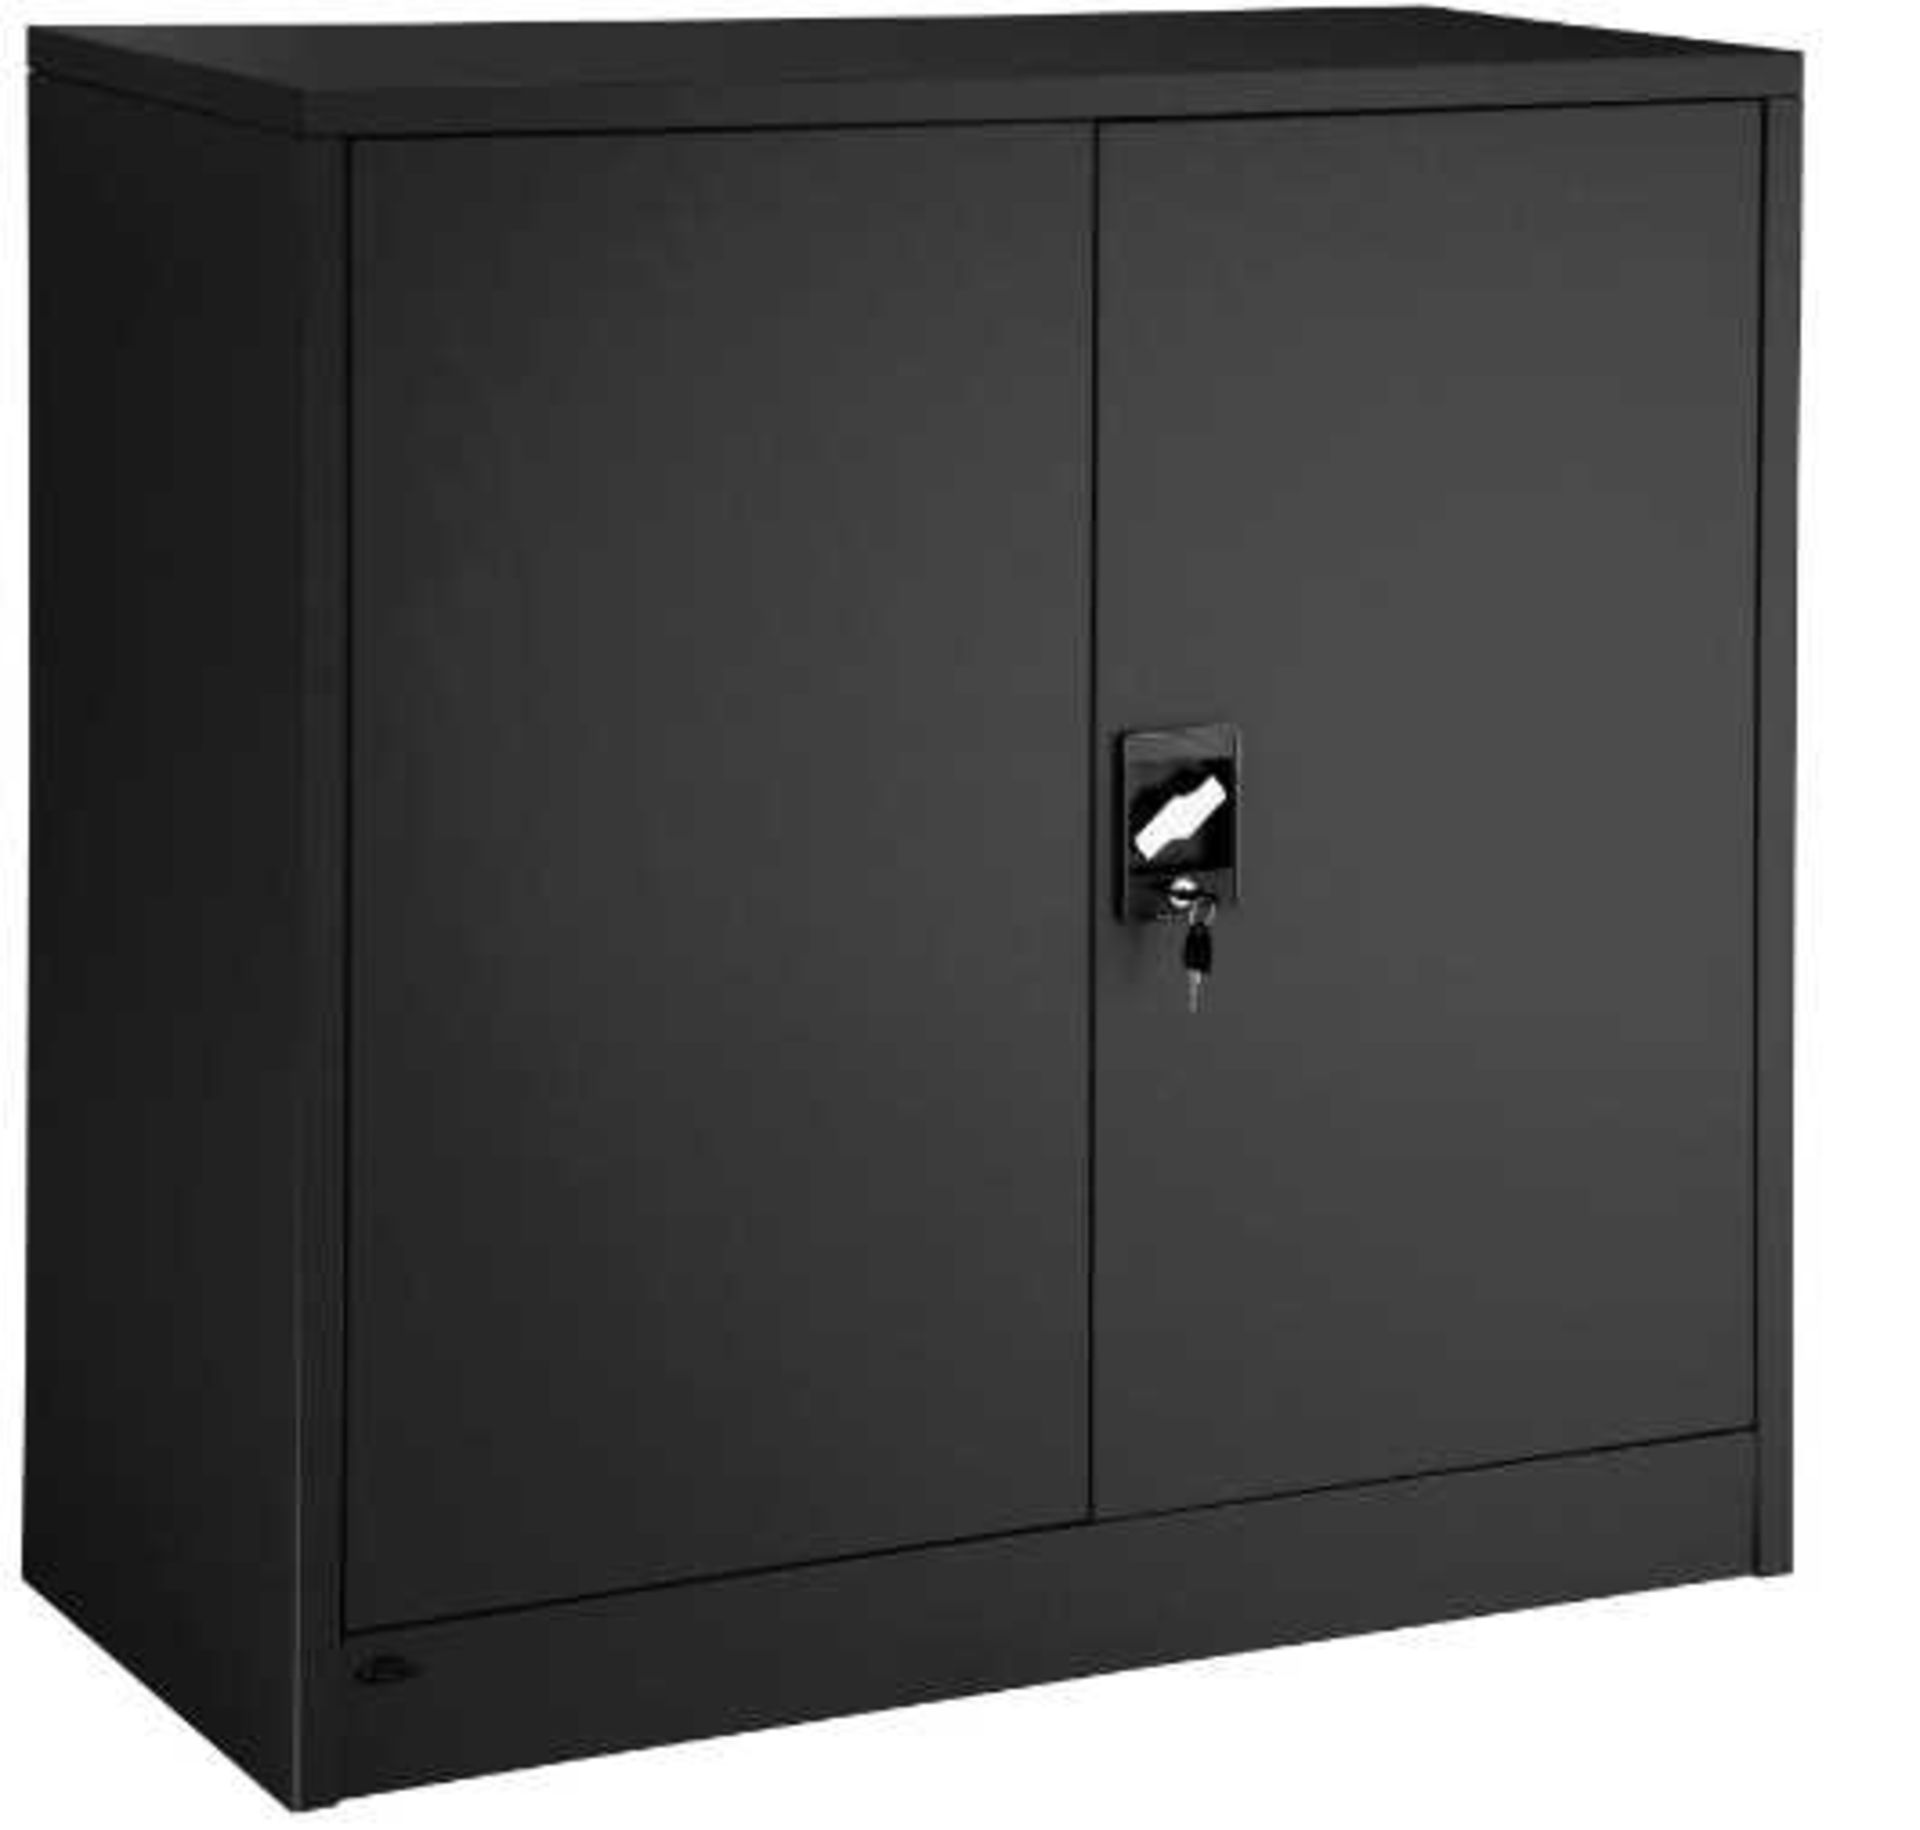 VAT Tectake - Filing Cabinet With 3 Compartments Grey 90x40x90cm - Unchecked & Boxed. RRP œ134.99 - Image 2 of 2